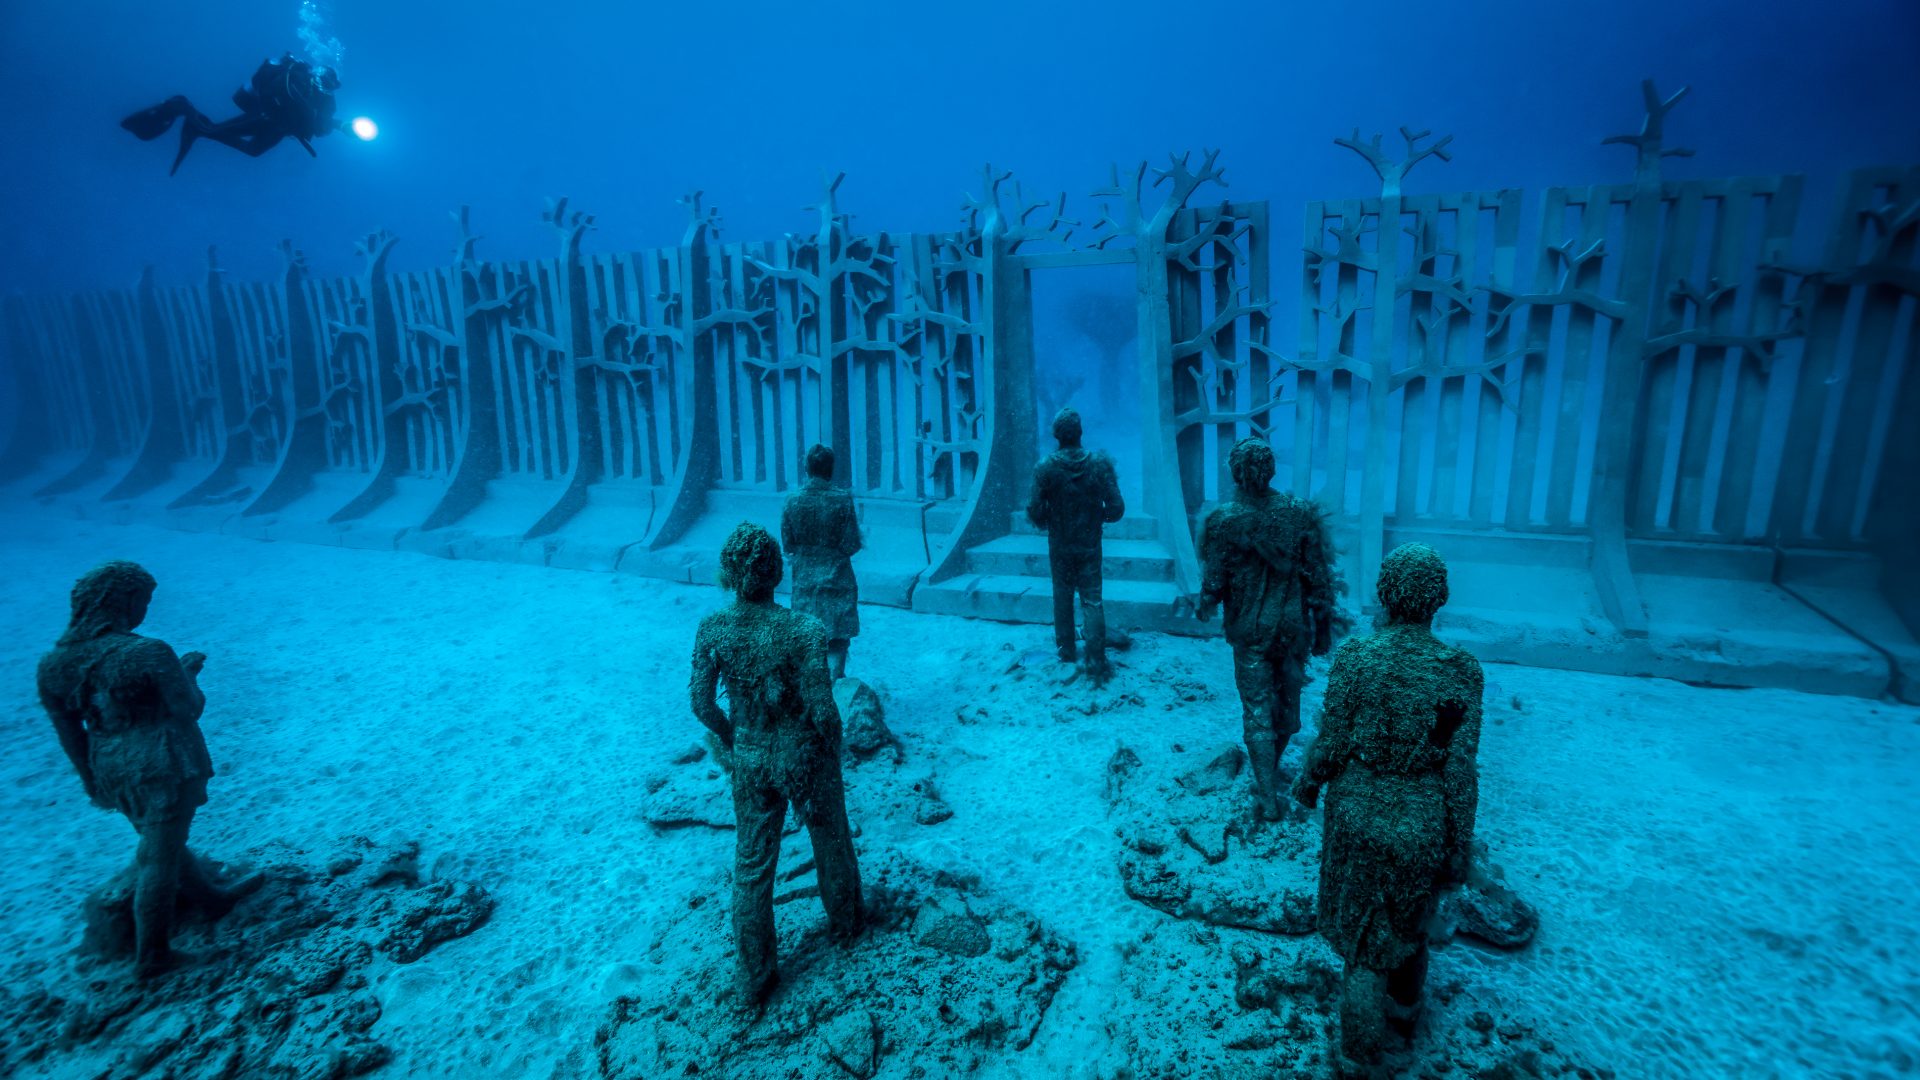 One of the pieces (Crossing the rubicon) in the underwater sculptural piece known as Vicissitudes by British artist Jason deCaires Taylor.